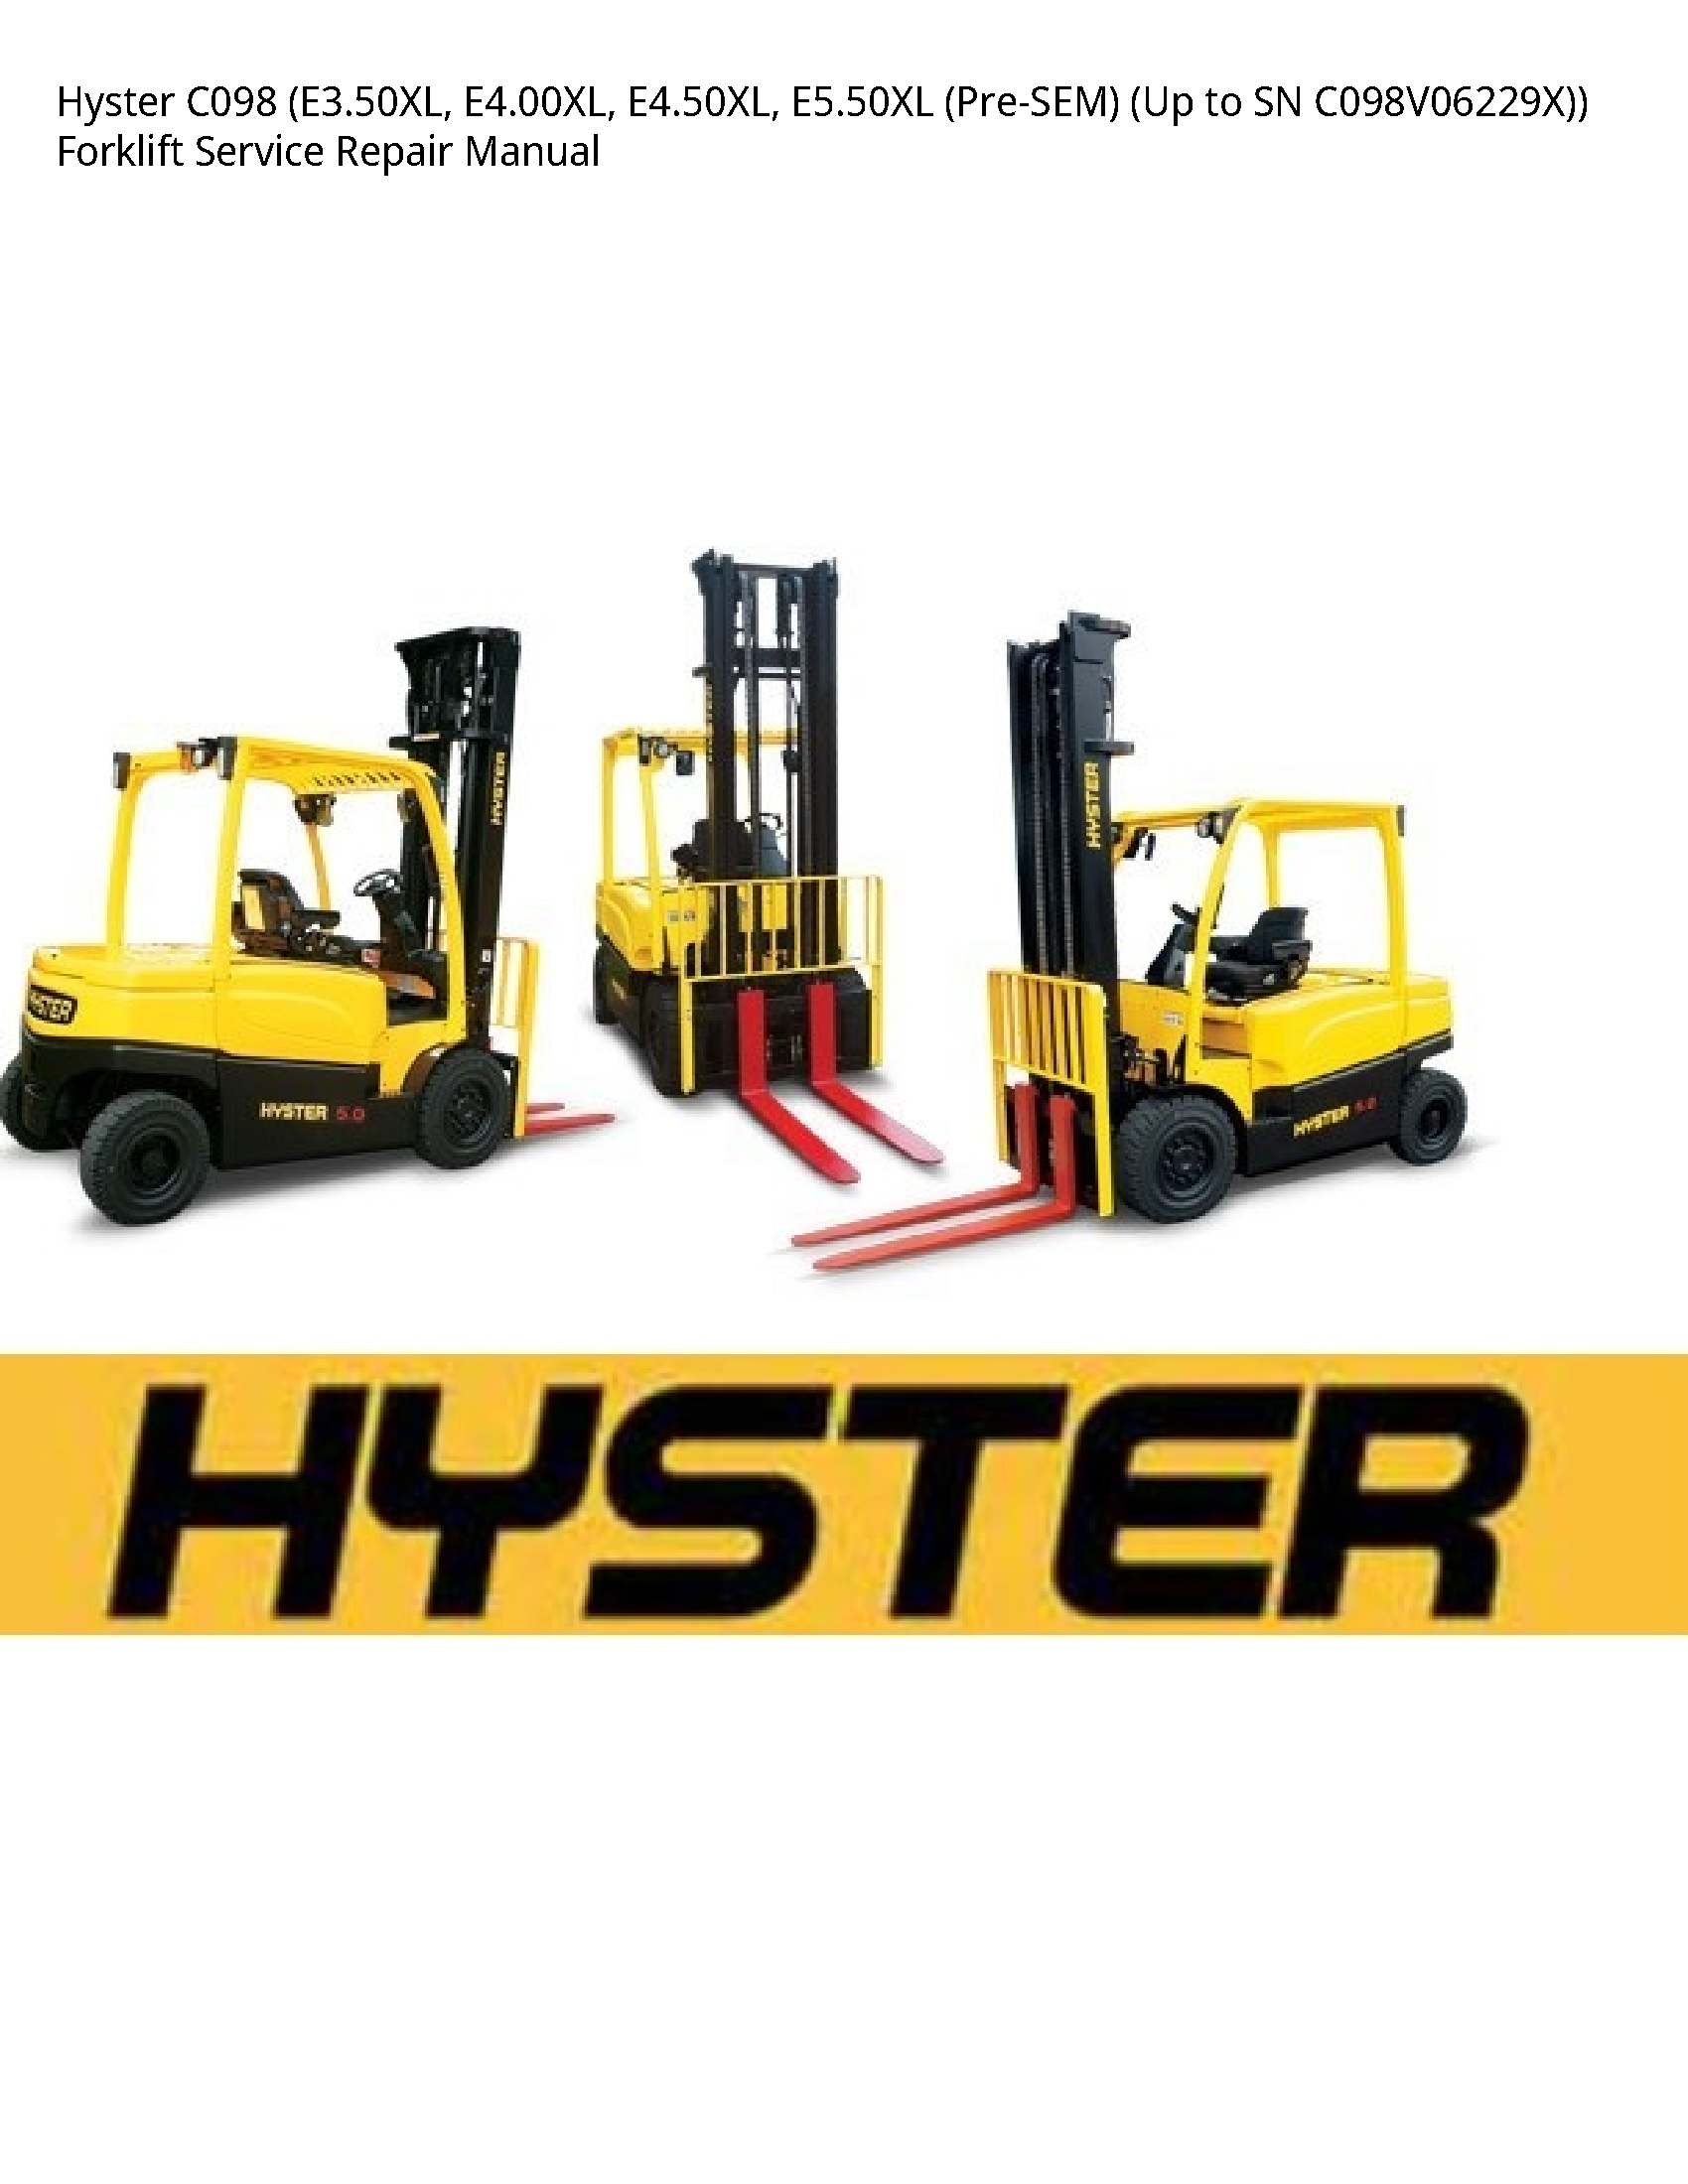 Hyster C098 (Pre-SEM) (Up to SN Forklift manual